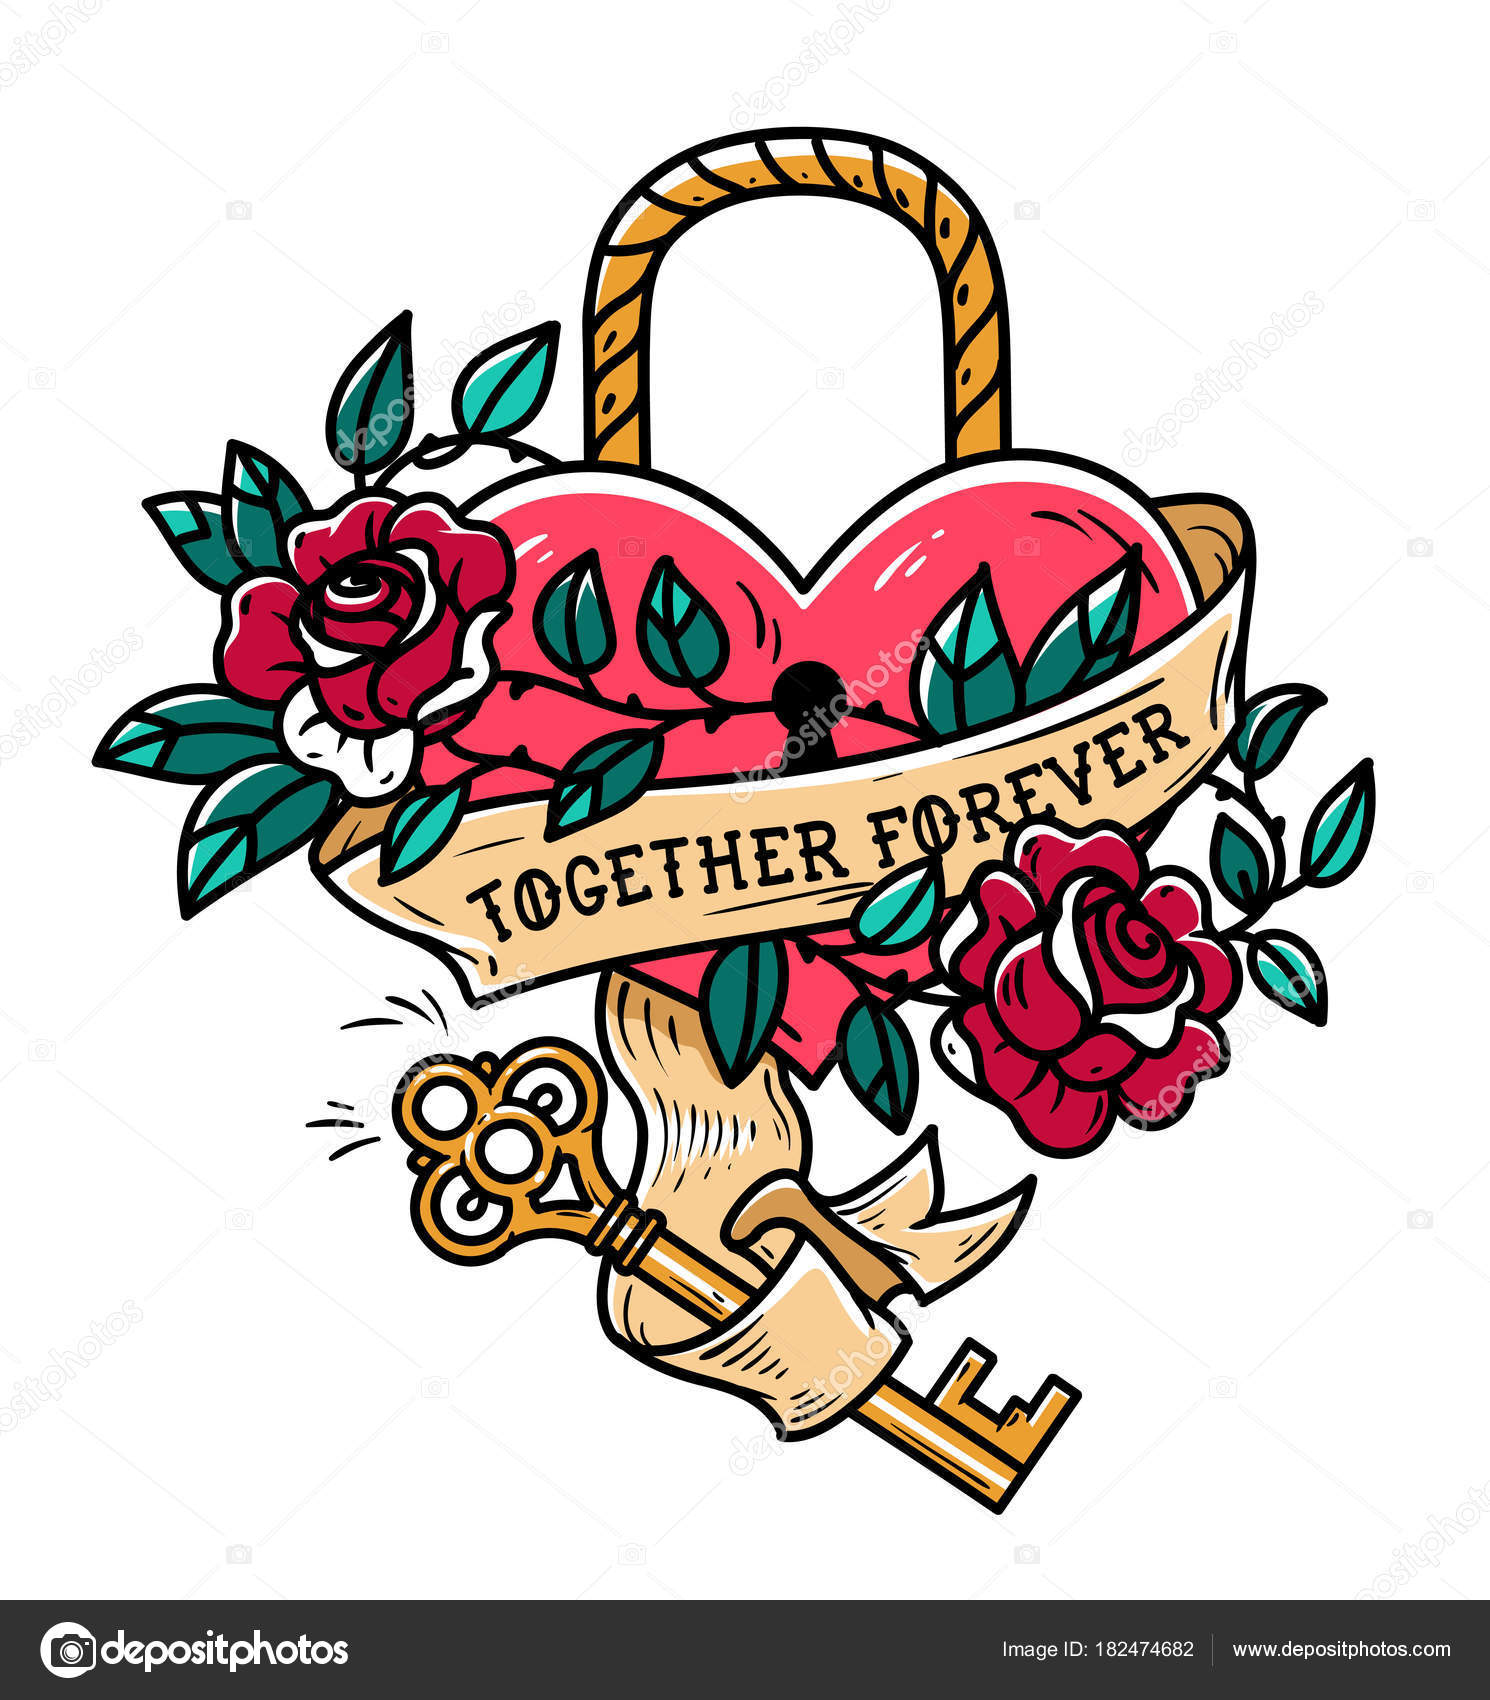 Tattoo Design Of Owl Holding Key Heart Locket And Roses Stock Illustration  - Download Image Now - iStock